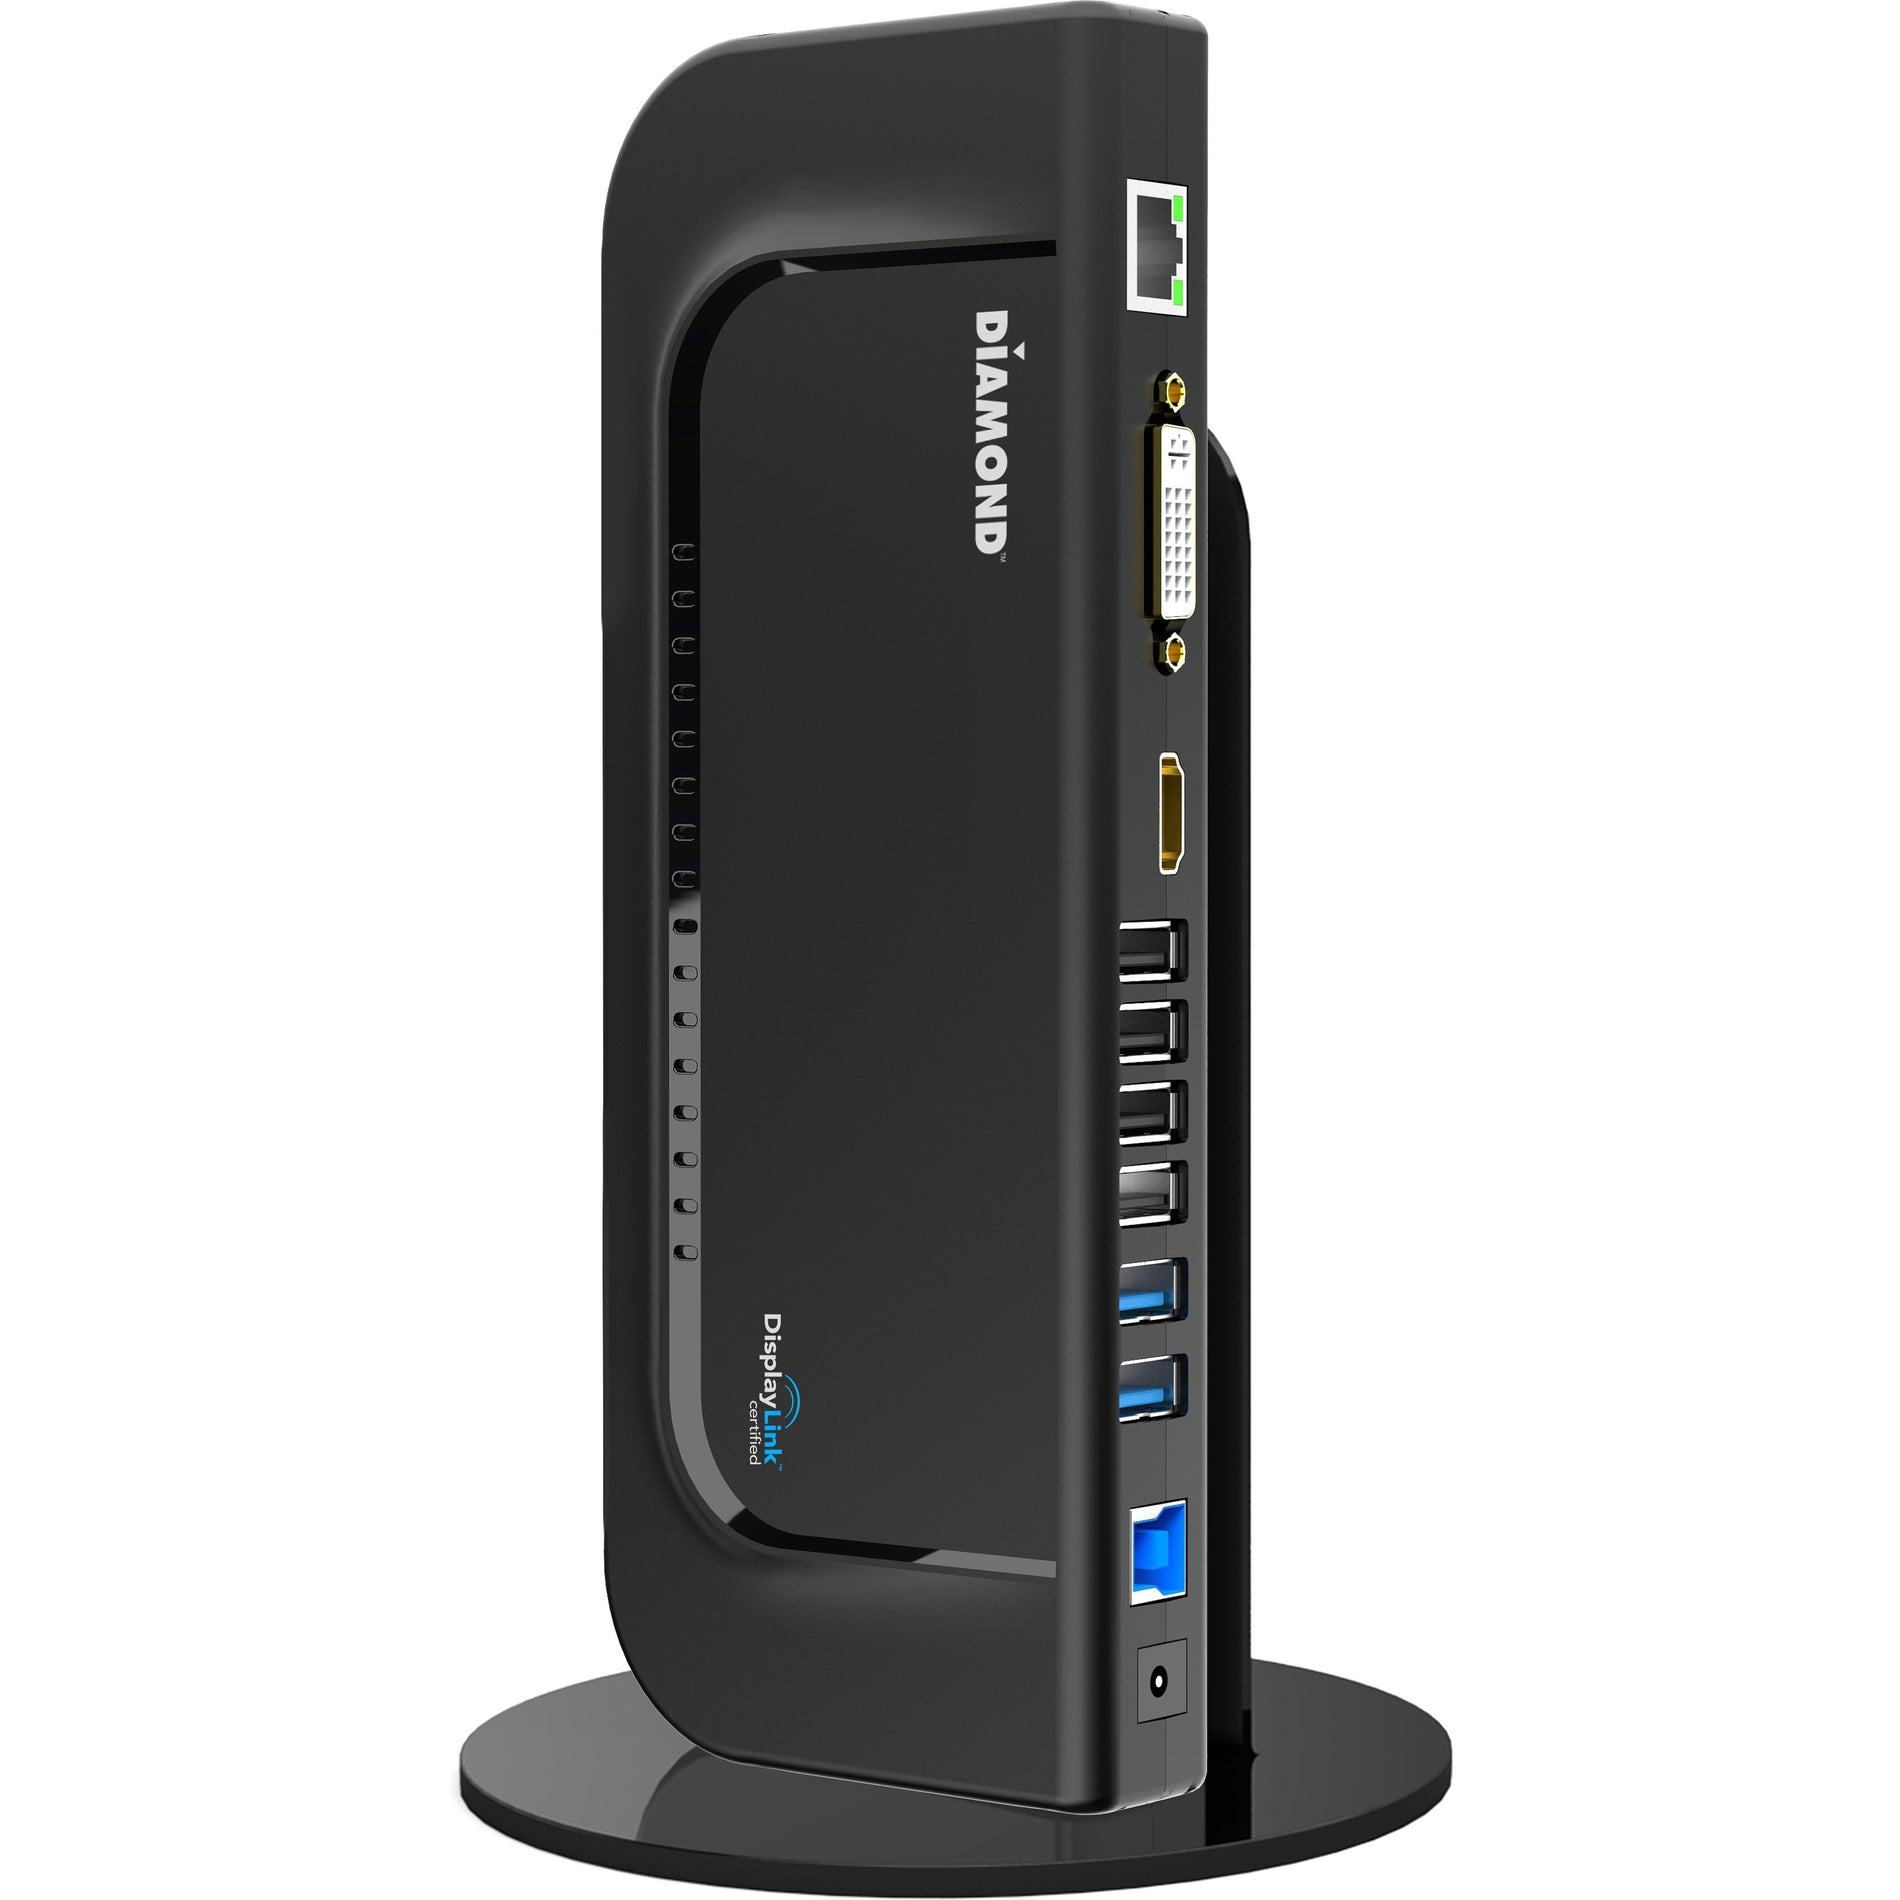 DIAMOND DS3900V2 Ultra Dock, Universal Docking Station with USB 3.0, HDMI, DVI, and More [Discontinued]